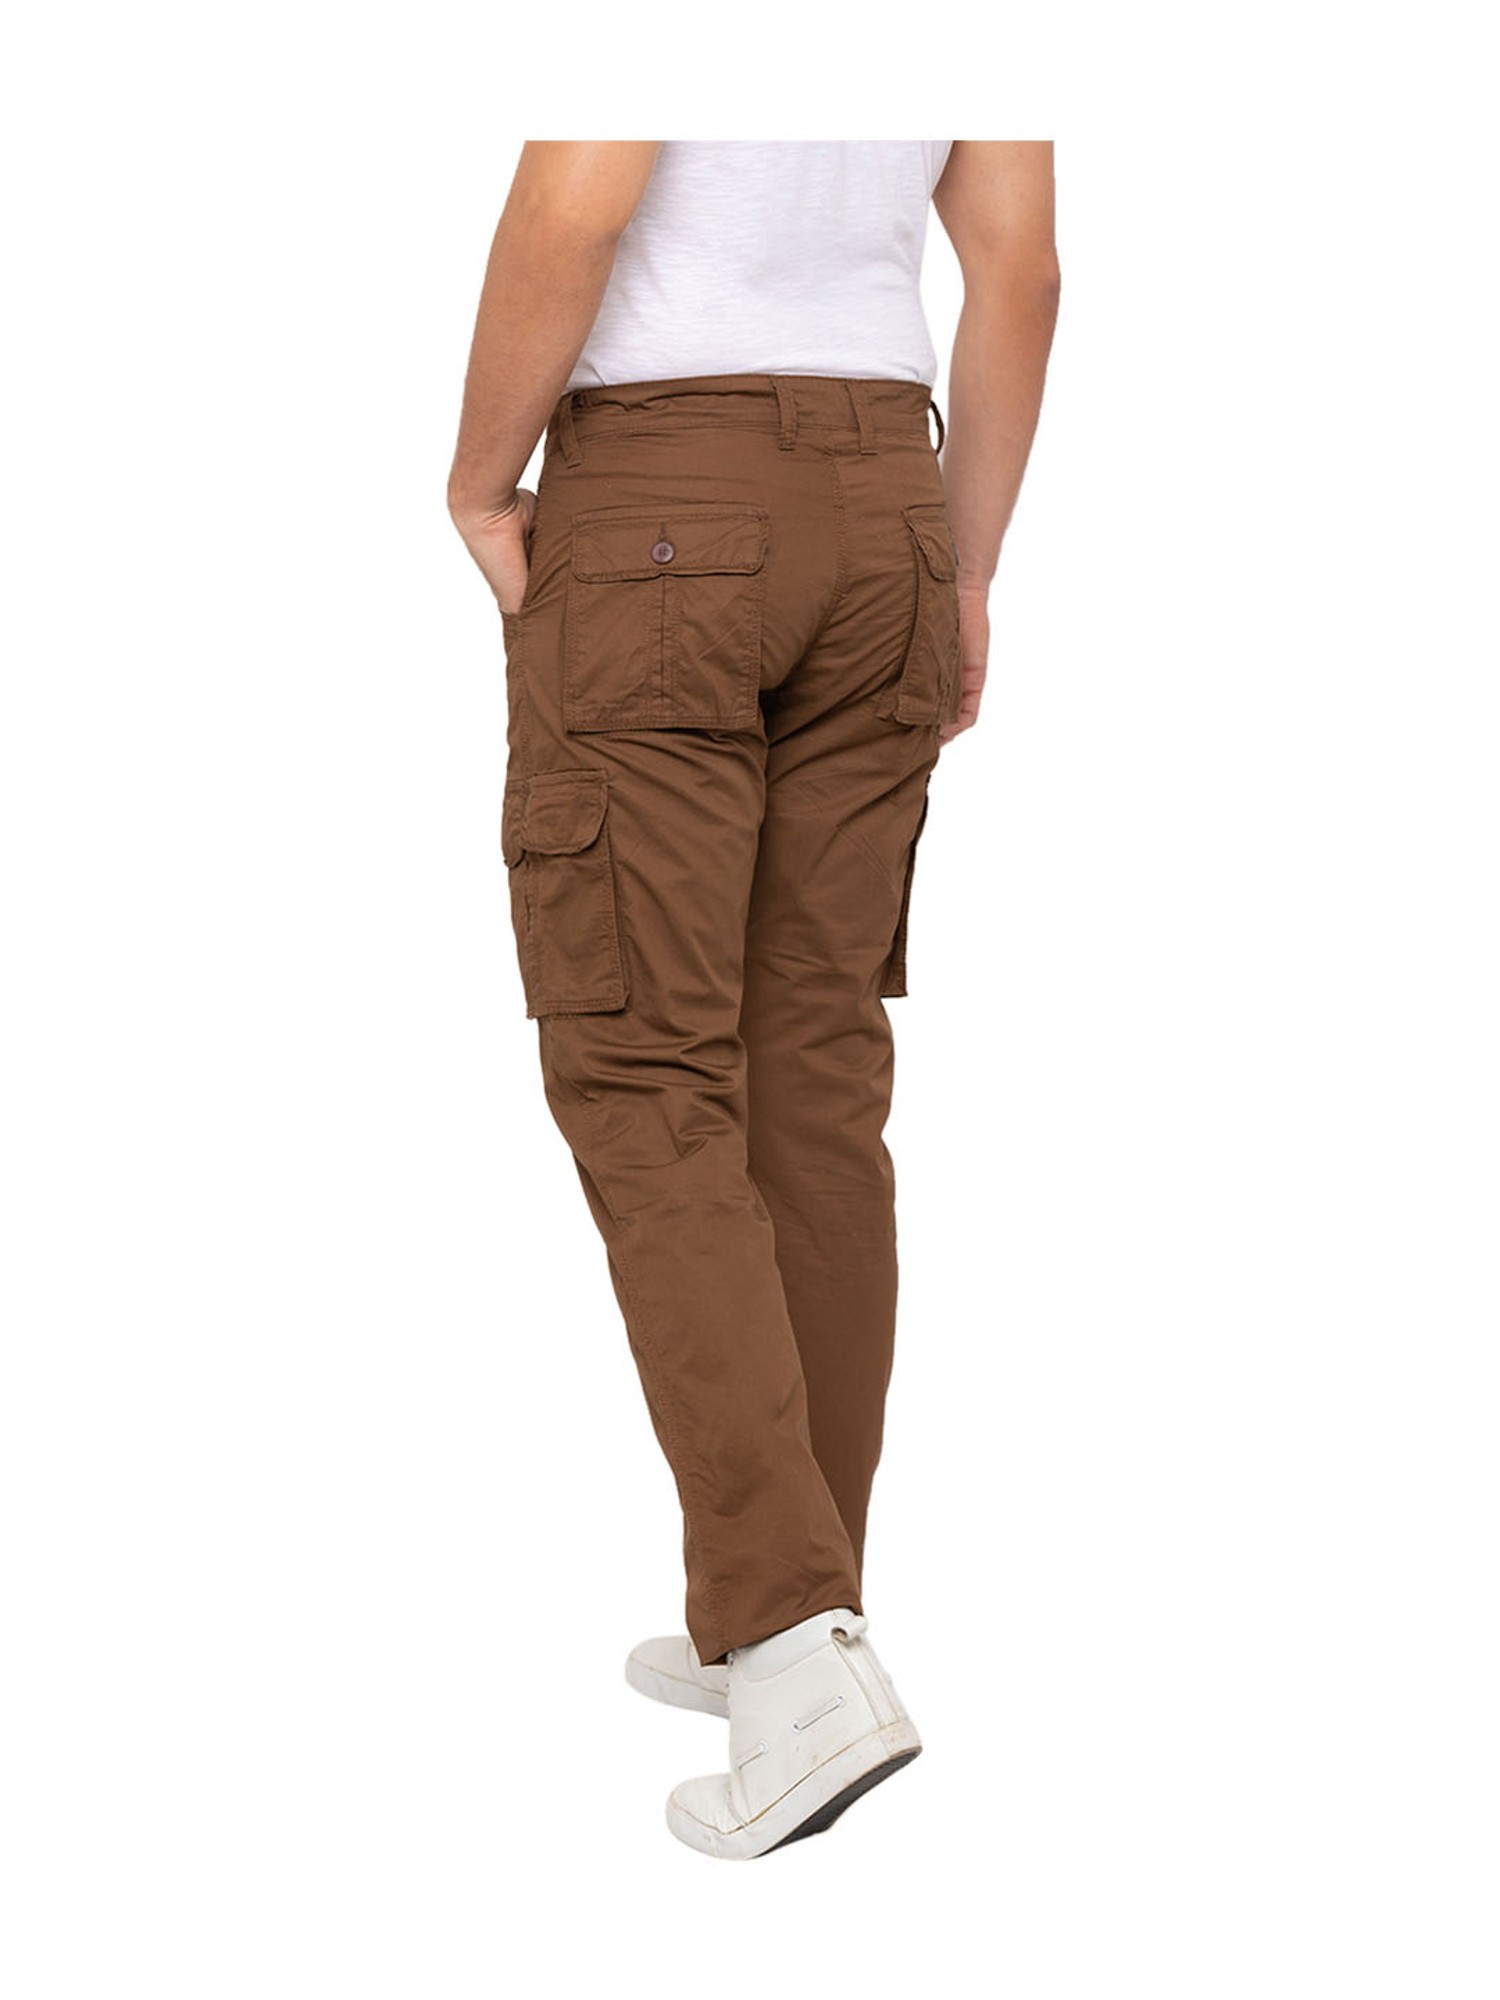 brown cargo pants for SaleUp To OFF 71